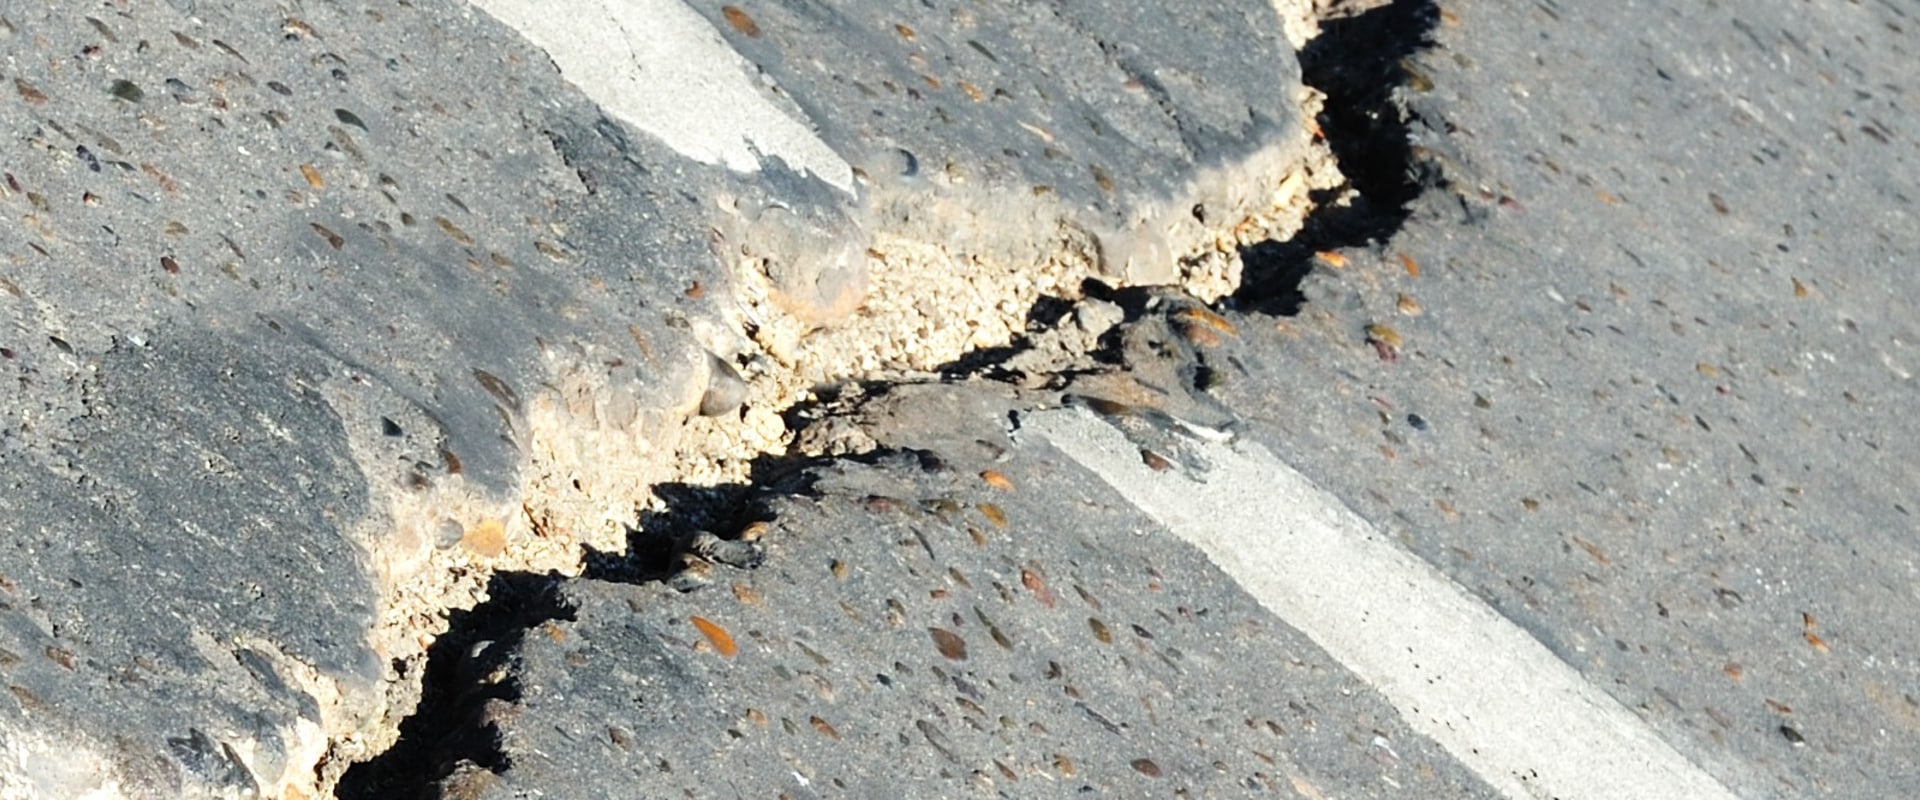 How to Repair Cracks in a Concrete Driveway